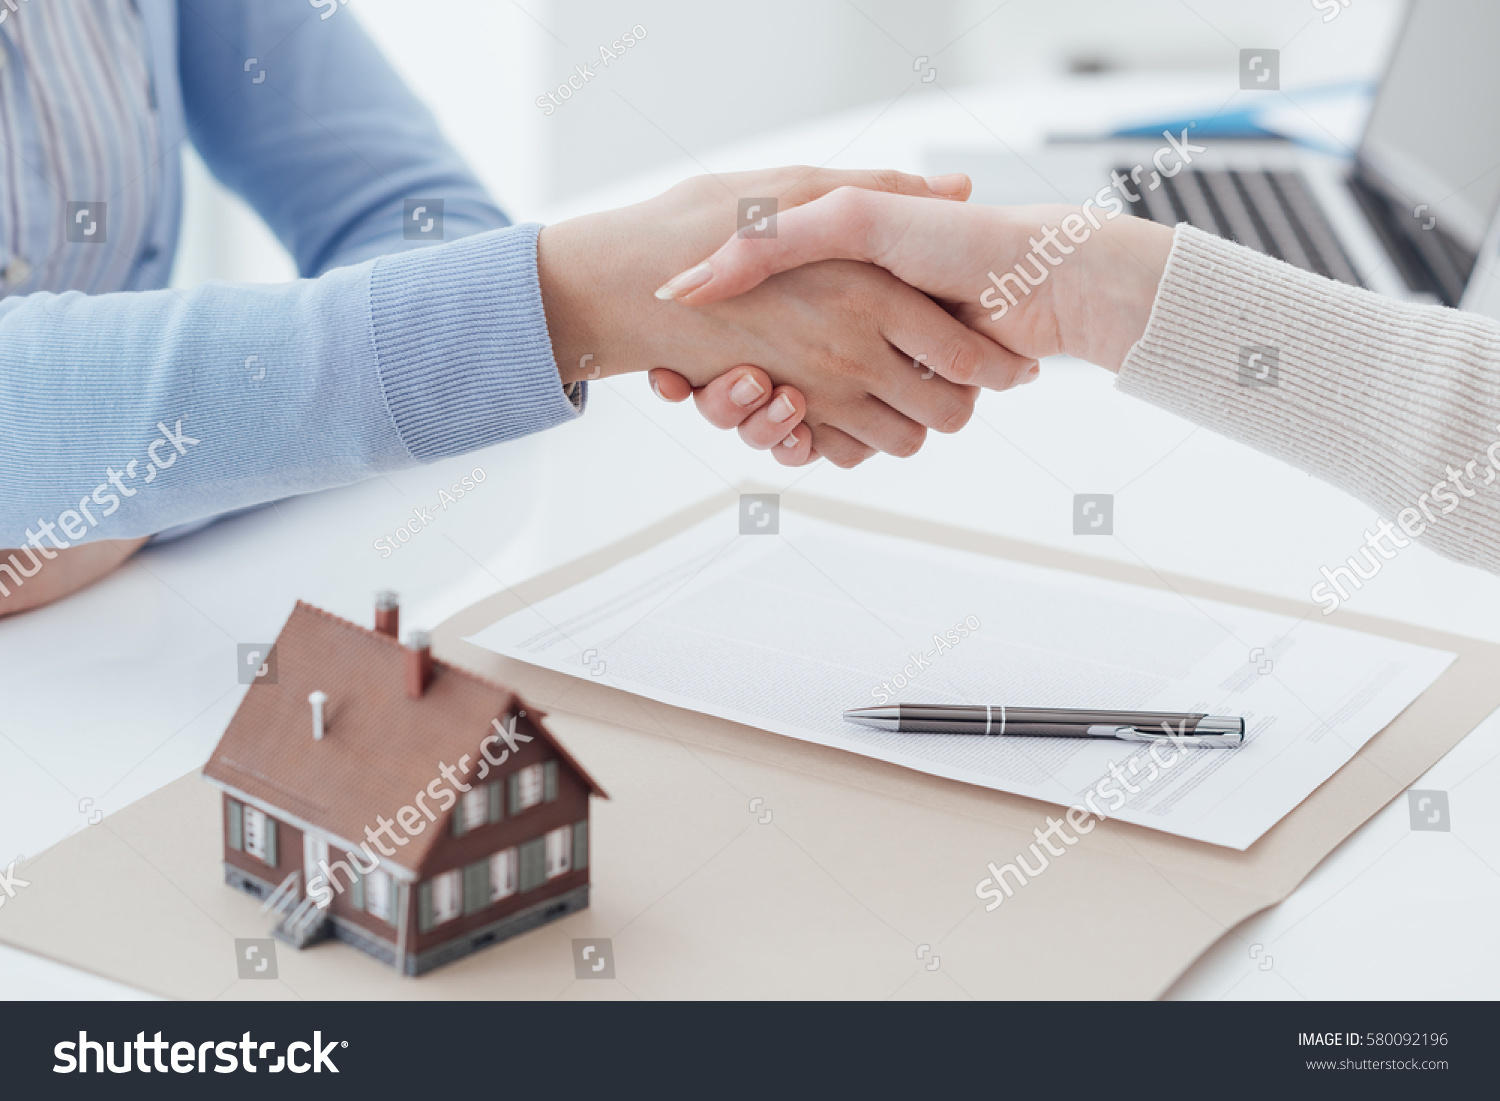 Real estate broker and customer shaking hands after signing a contract: real estate, home loan and insurance concept #580092196